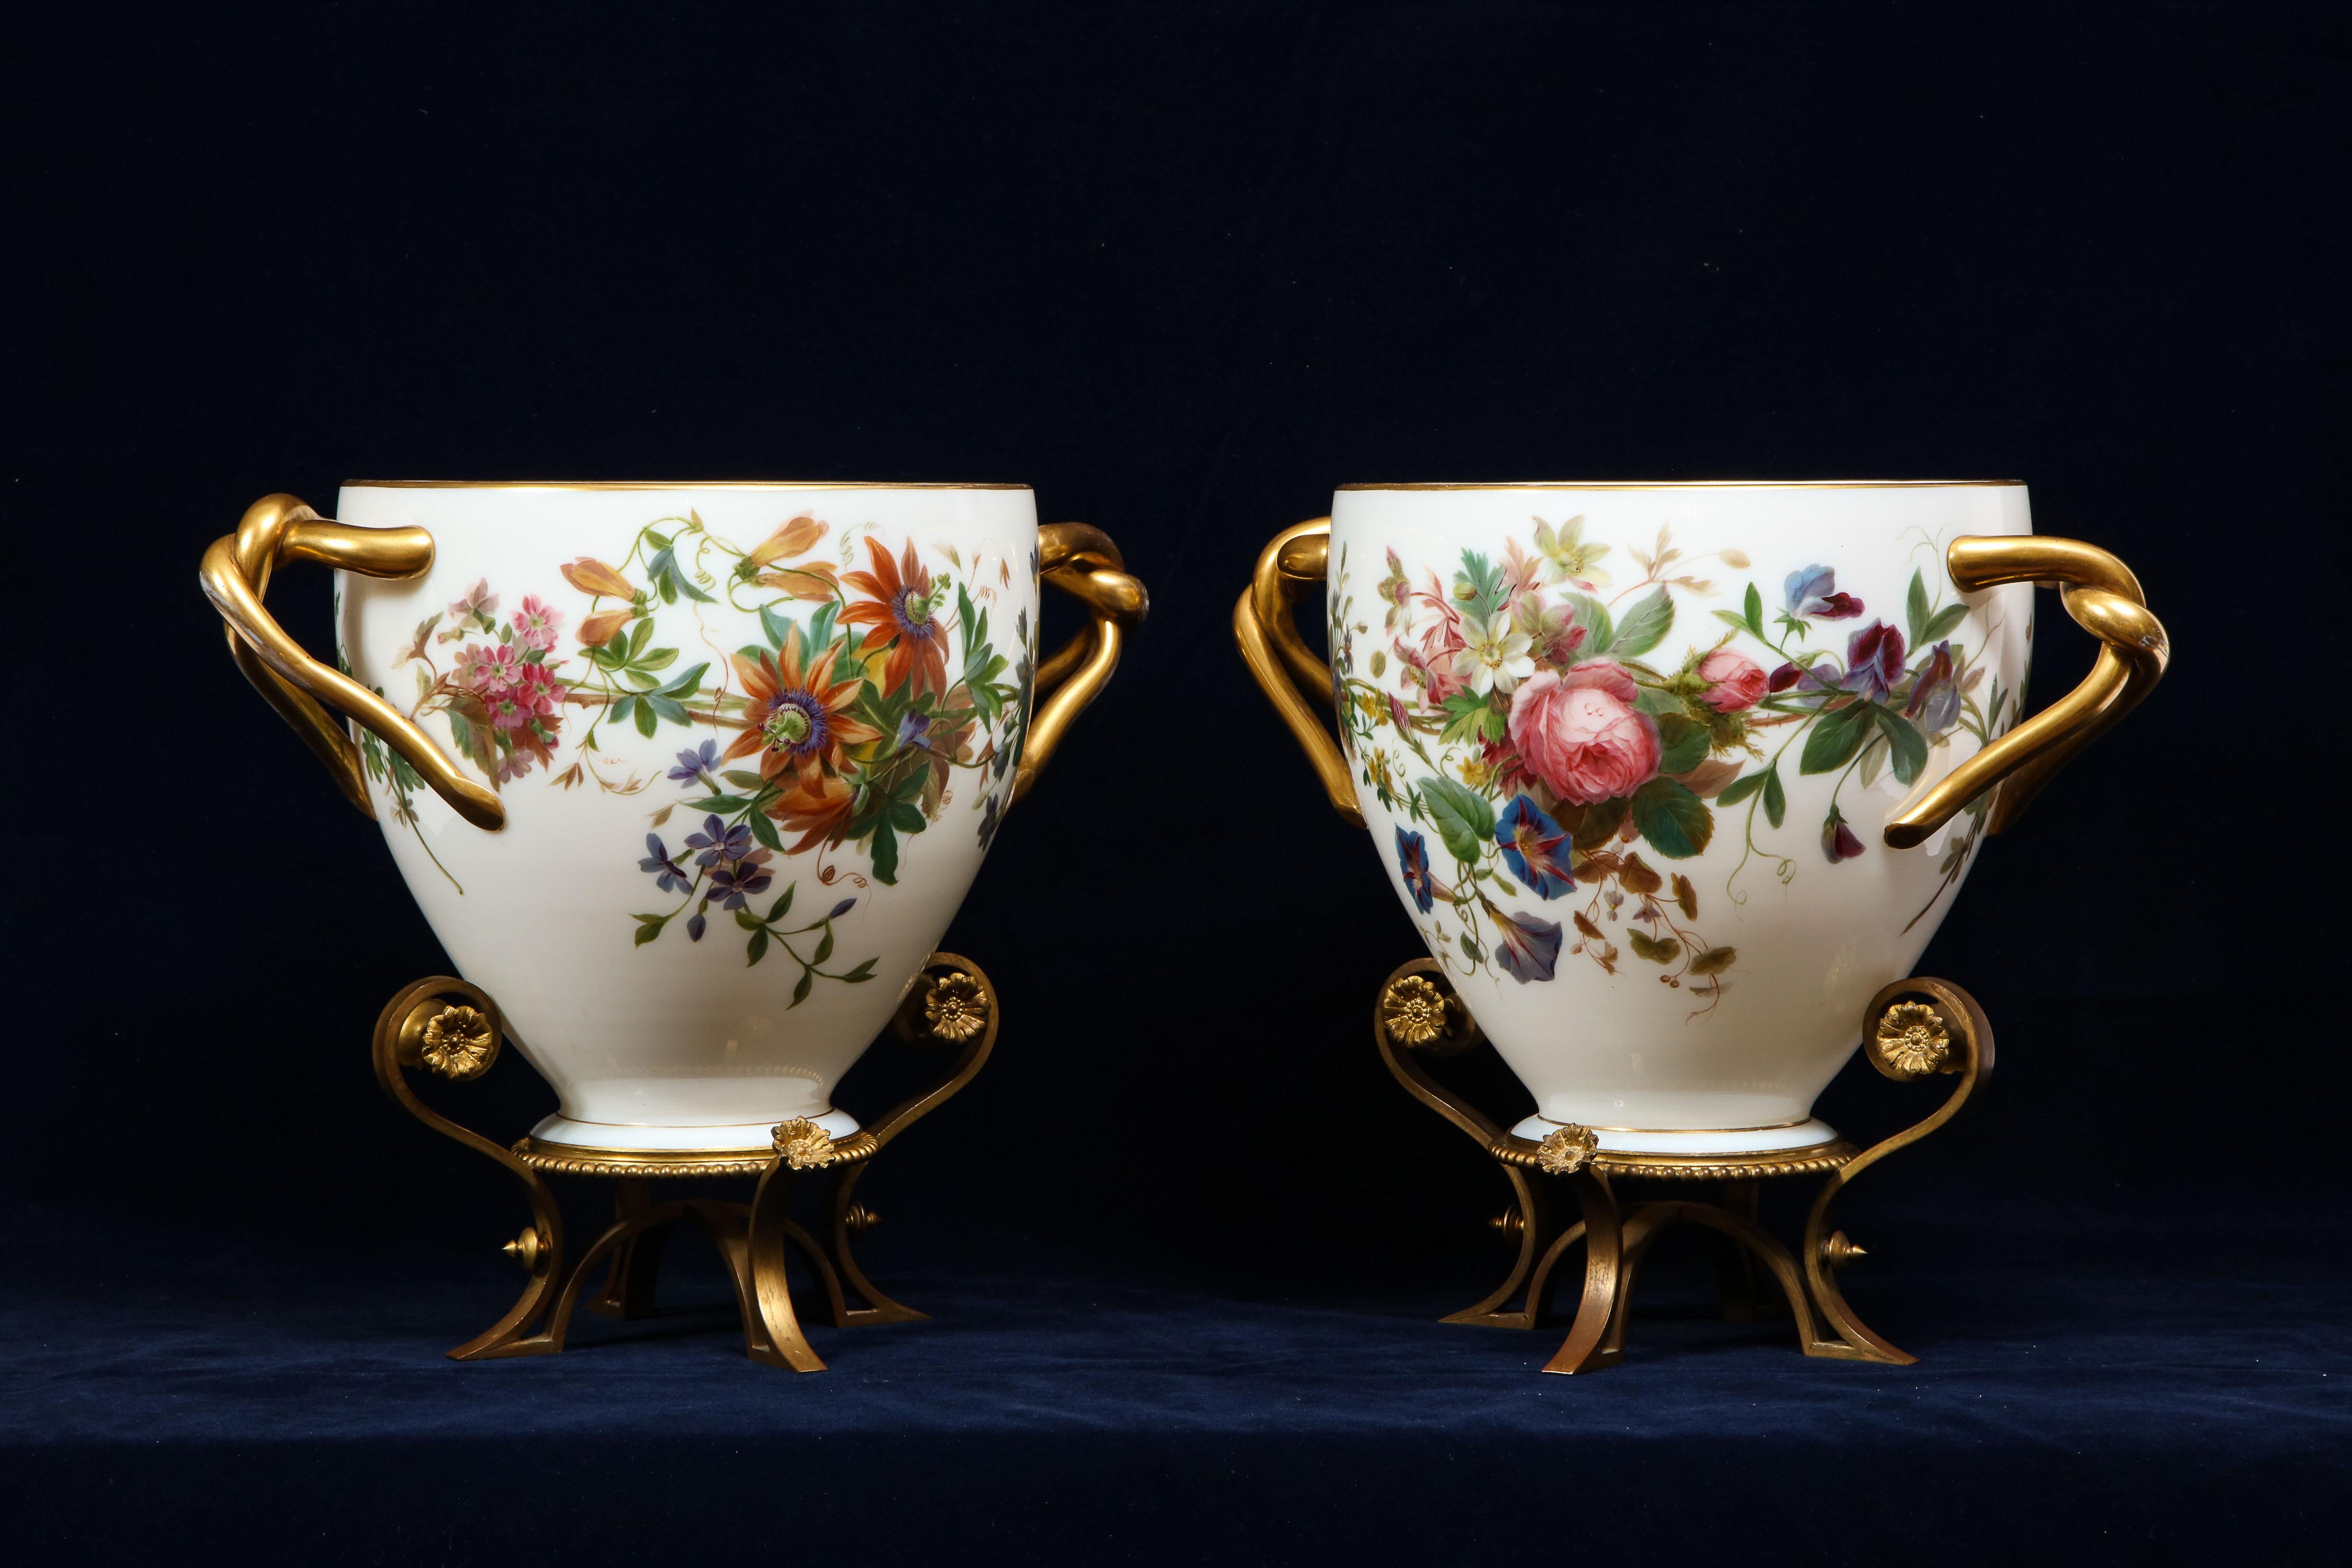 An extraordinary pair of Ormolu-Mounted enamel hand-painted white opaline vases/planters/jardinieres with gorgeous floral decorations most probably for the Paris Exposition Universelle, signed and dated Baccarat 10th of July 1866. This exceptional